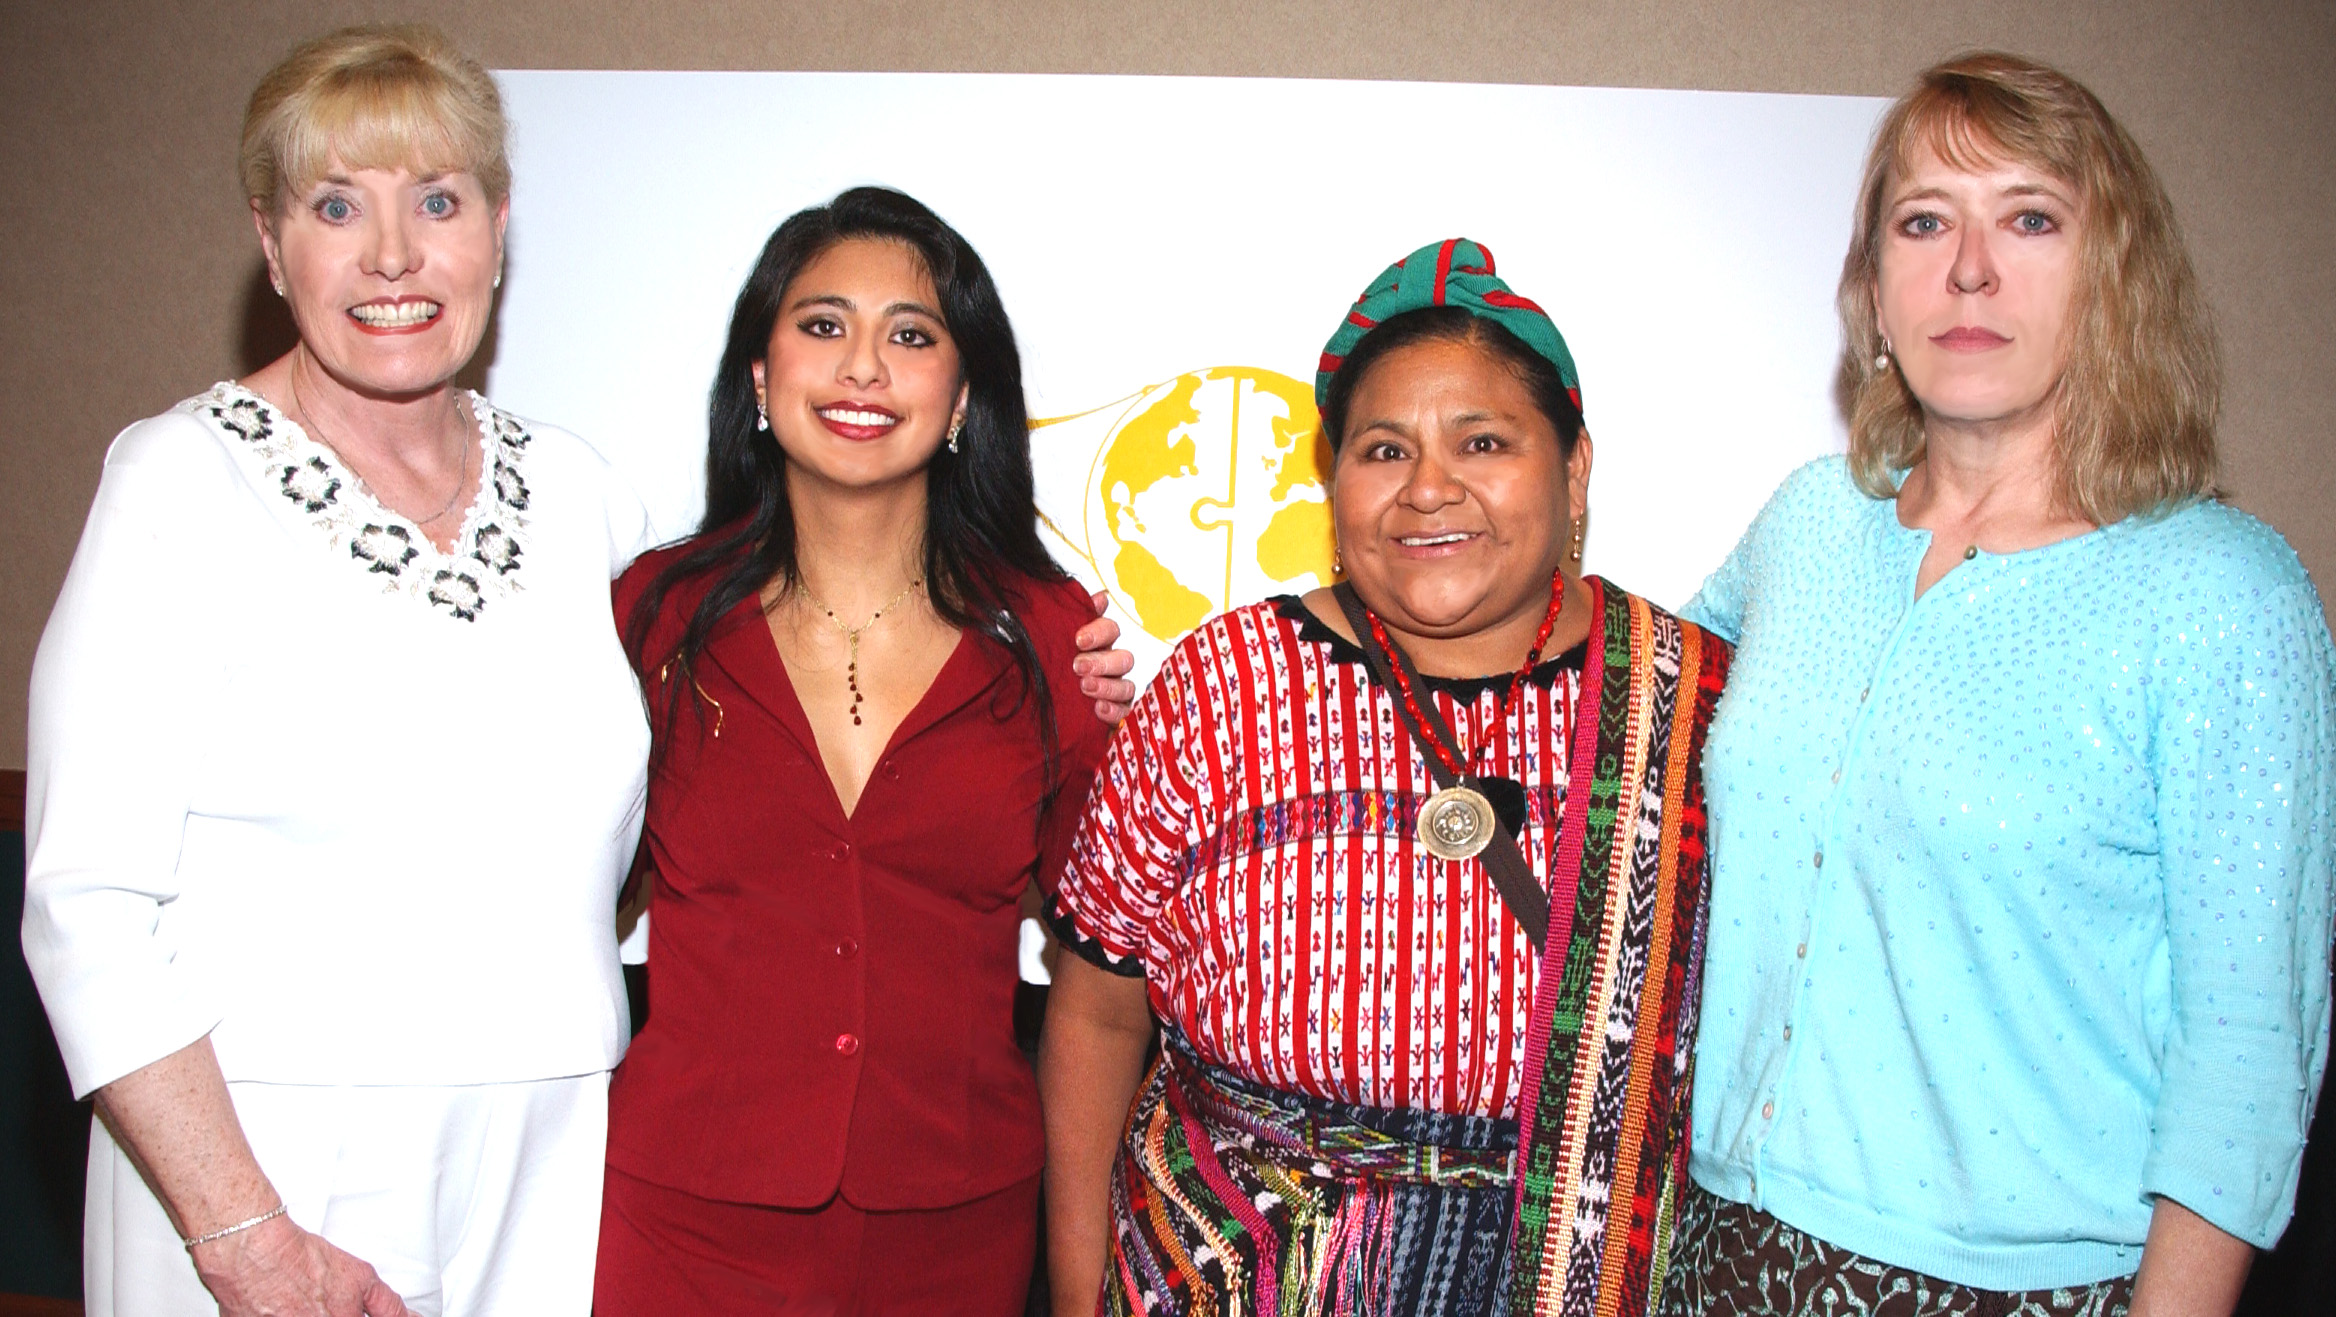 The Memnosyne Foundation awarded grants during the Women's Peace Conference to Nobel Peace Laureates, (Betty Williams, Rigoberta Menchu, and Jody Williams) towards their ongoing work around the globe!